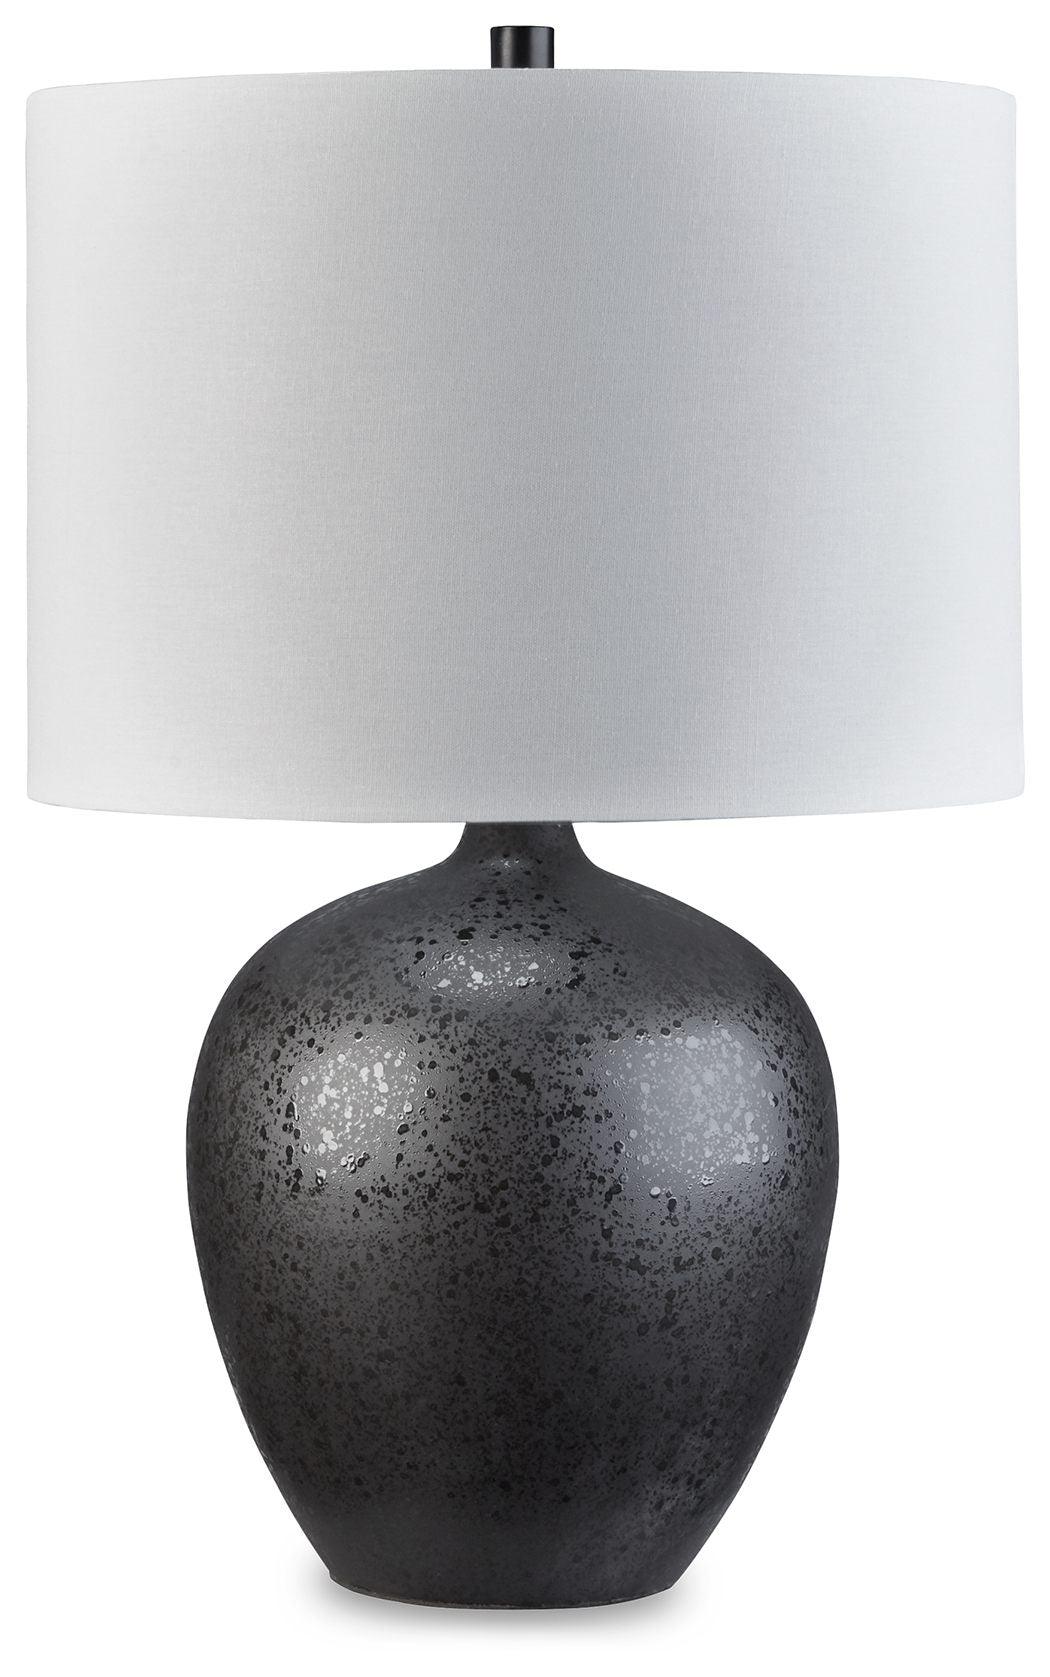 Ladstow - Black - Ceramic Table Lamp Tony's Home Furnishings Furniture. Beds. Dressers. Sofas.